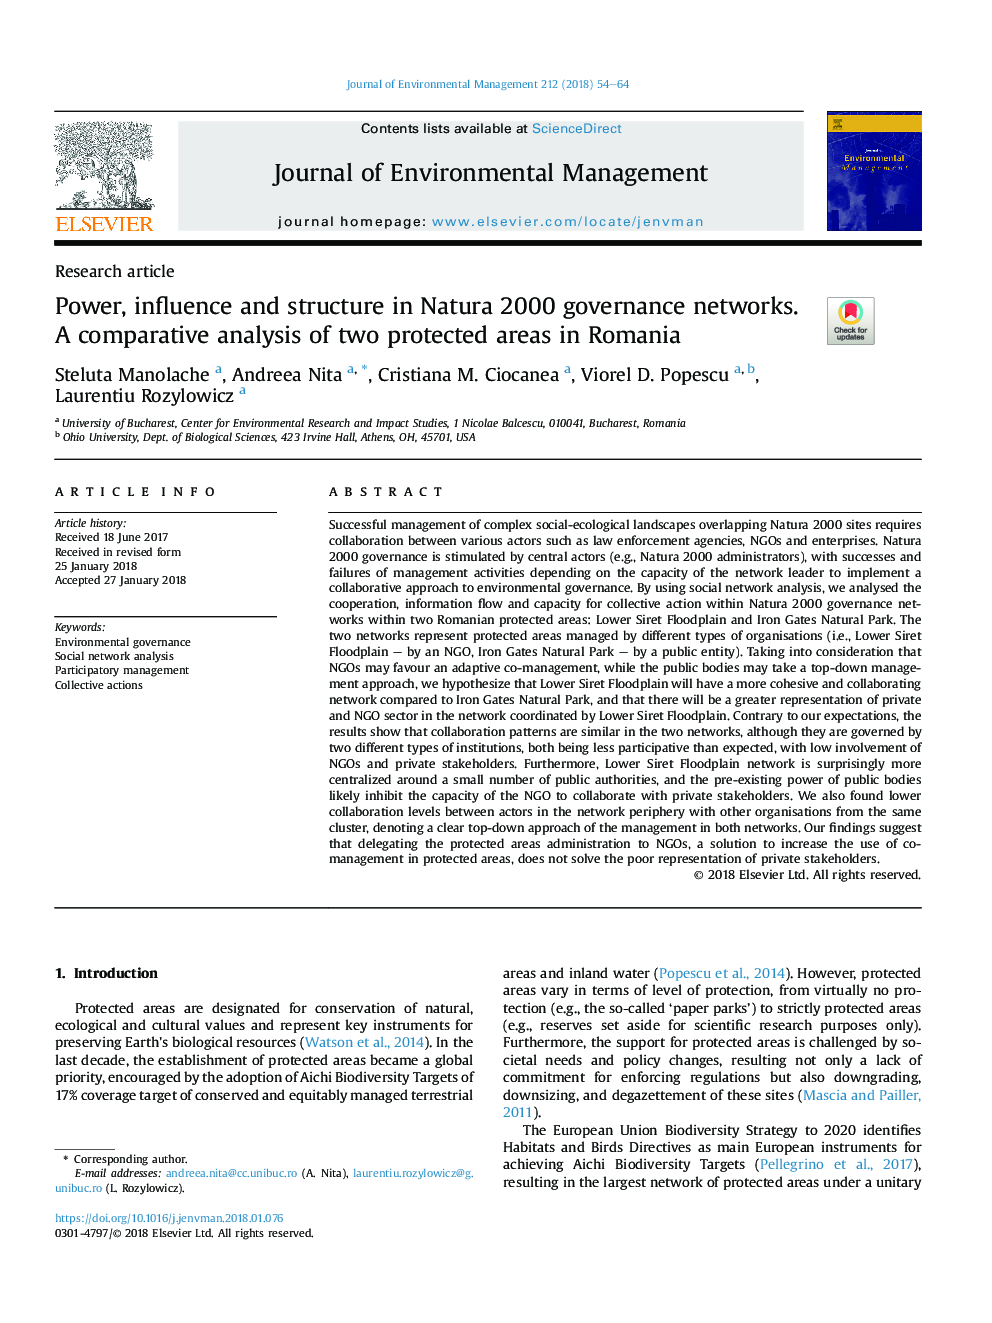 Power, influence and structure in Natura 2000 governance networks. A comparative analysis of two protected areas in Romania